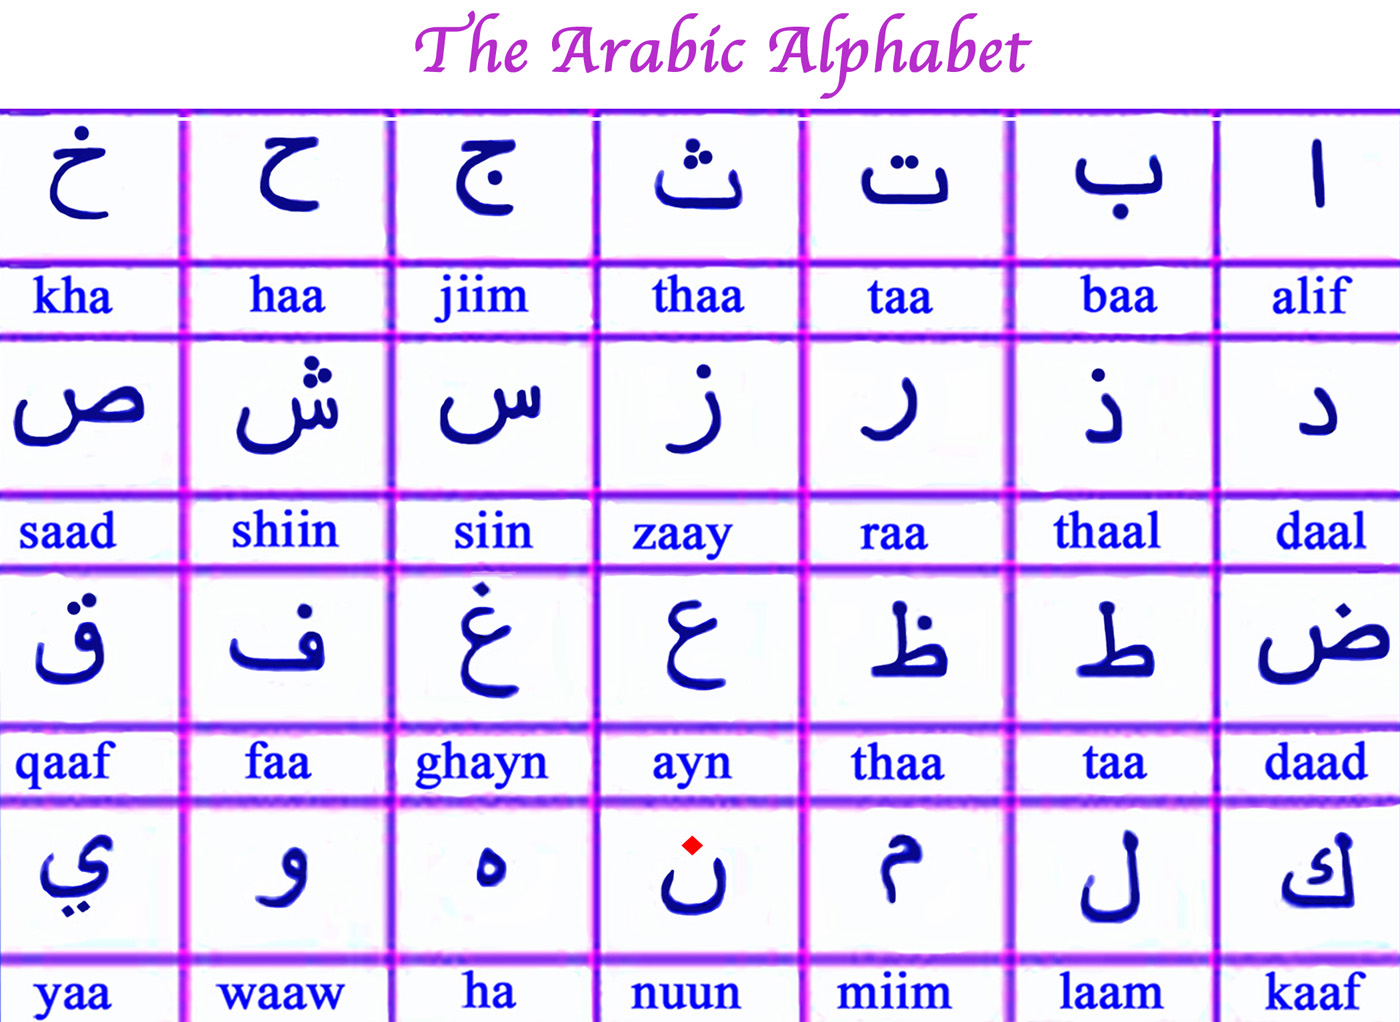 A chart of the Arabic alphabet with blue and purple gridlines, showing each letter in楷書體(楷書) script with its name in both Arabic and Roman characters.